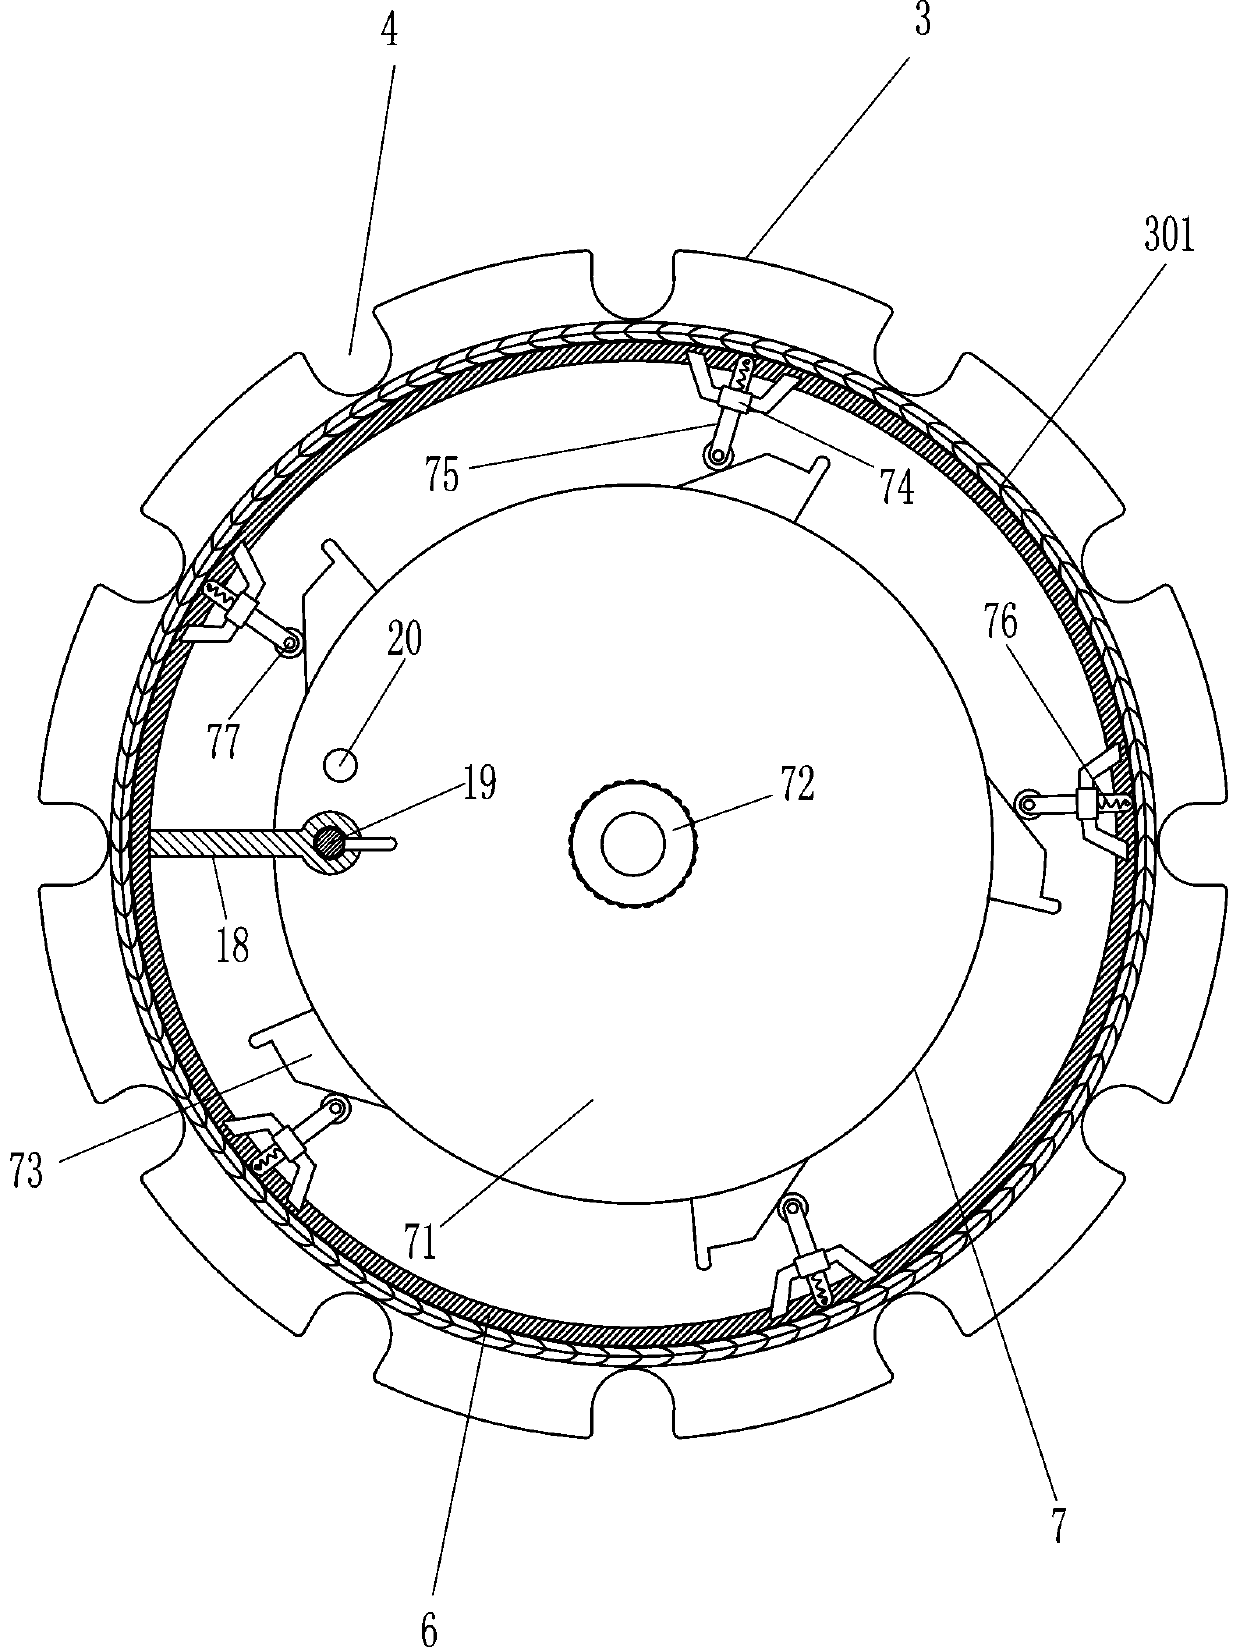 Support device for base reinforcement welding